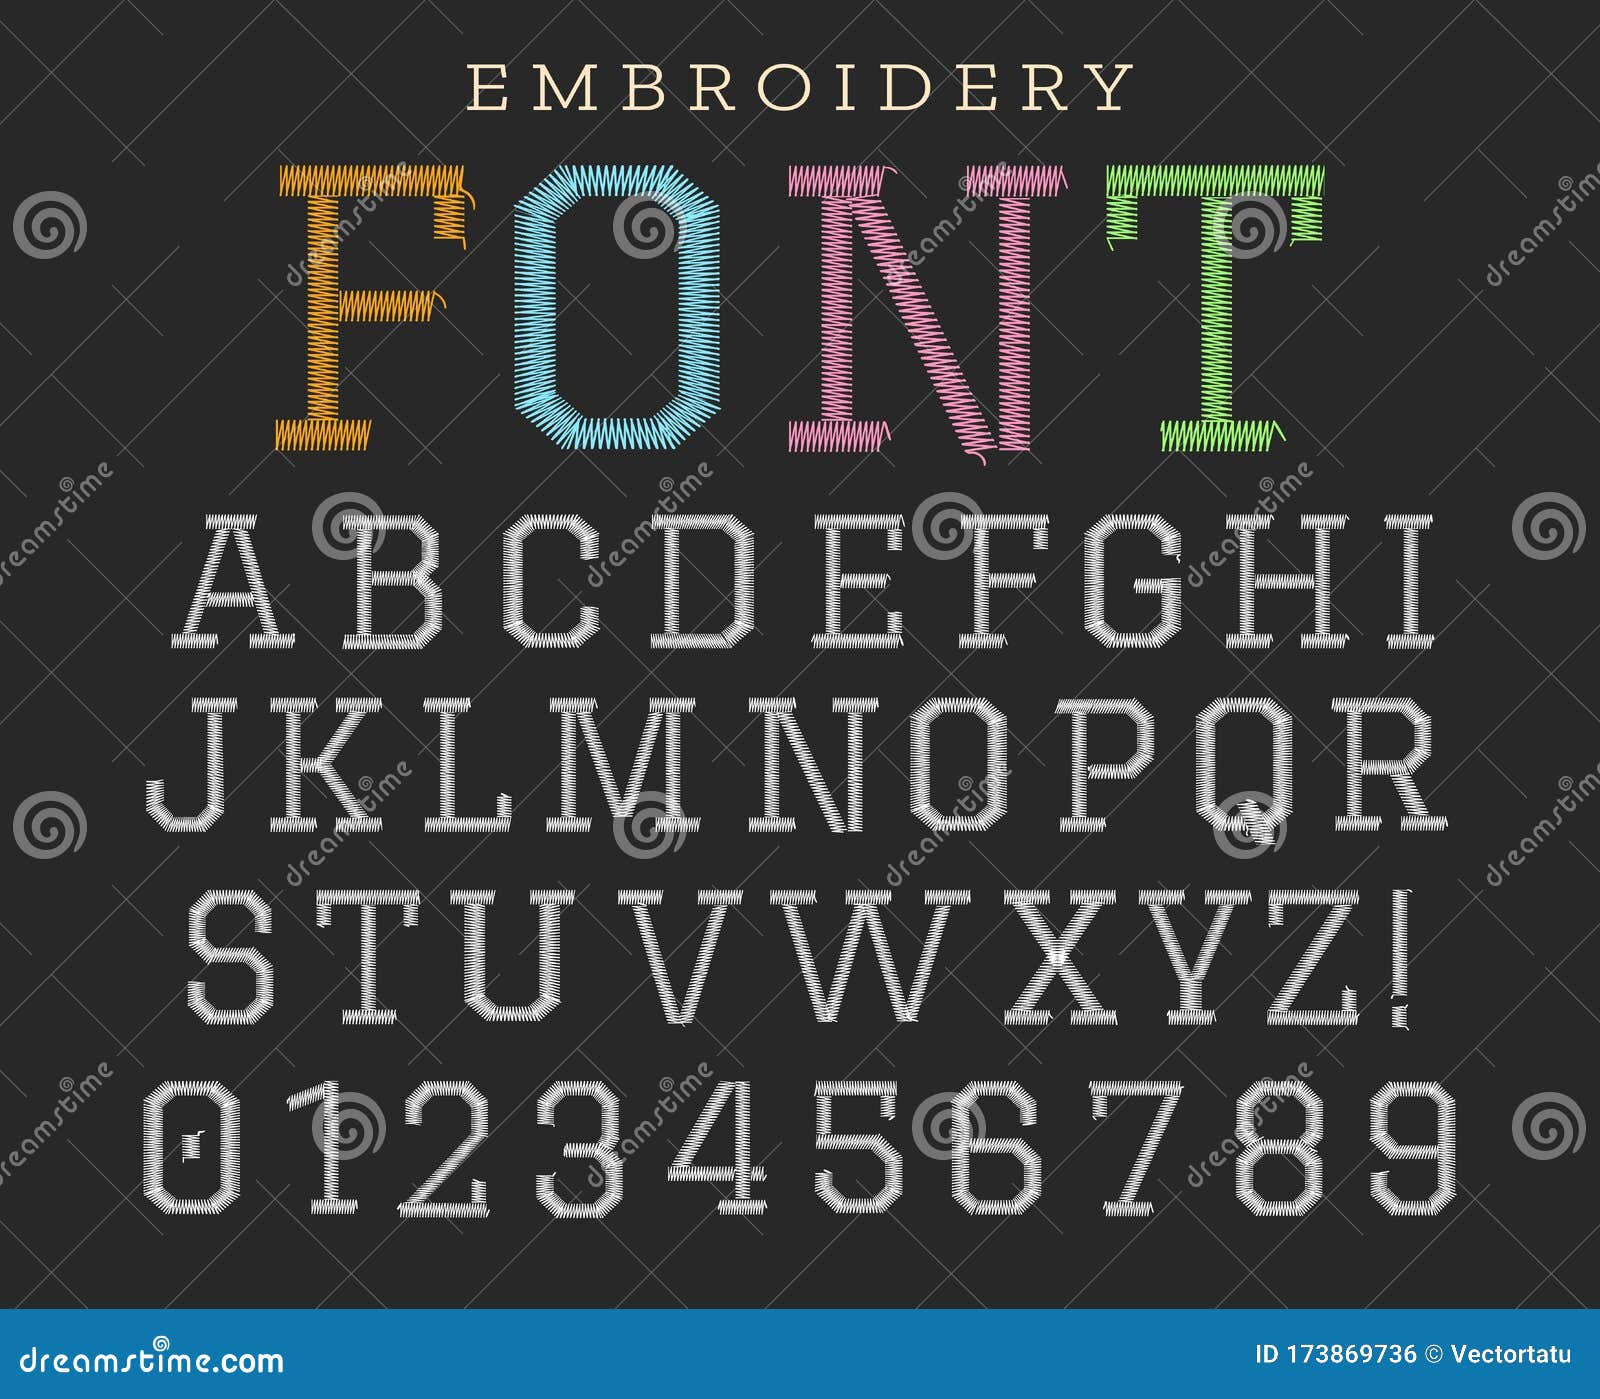 embroidery font, sew letters